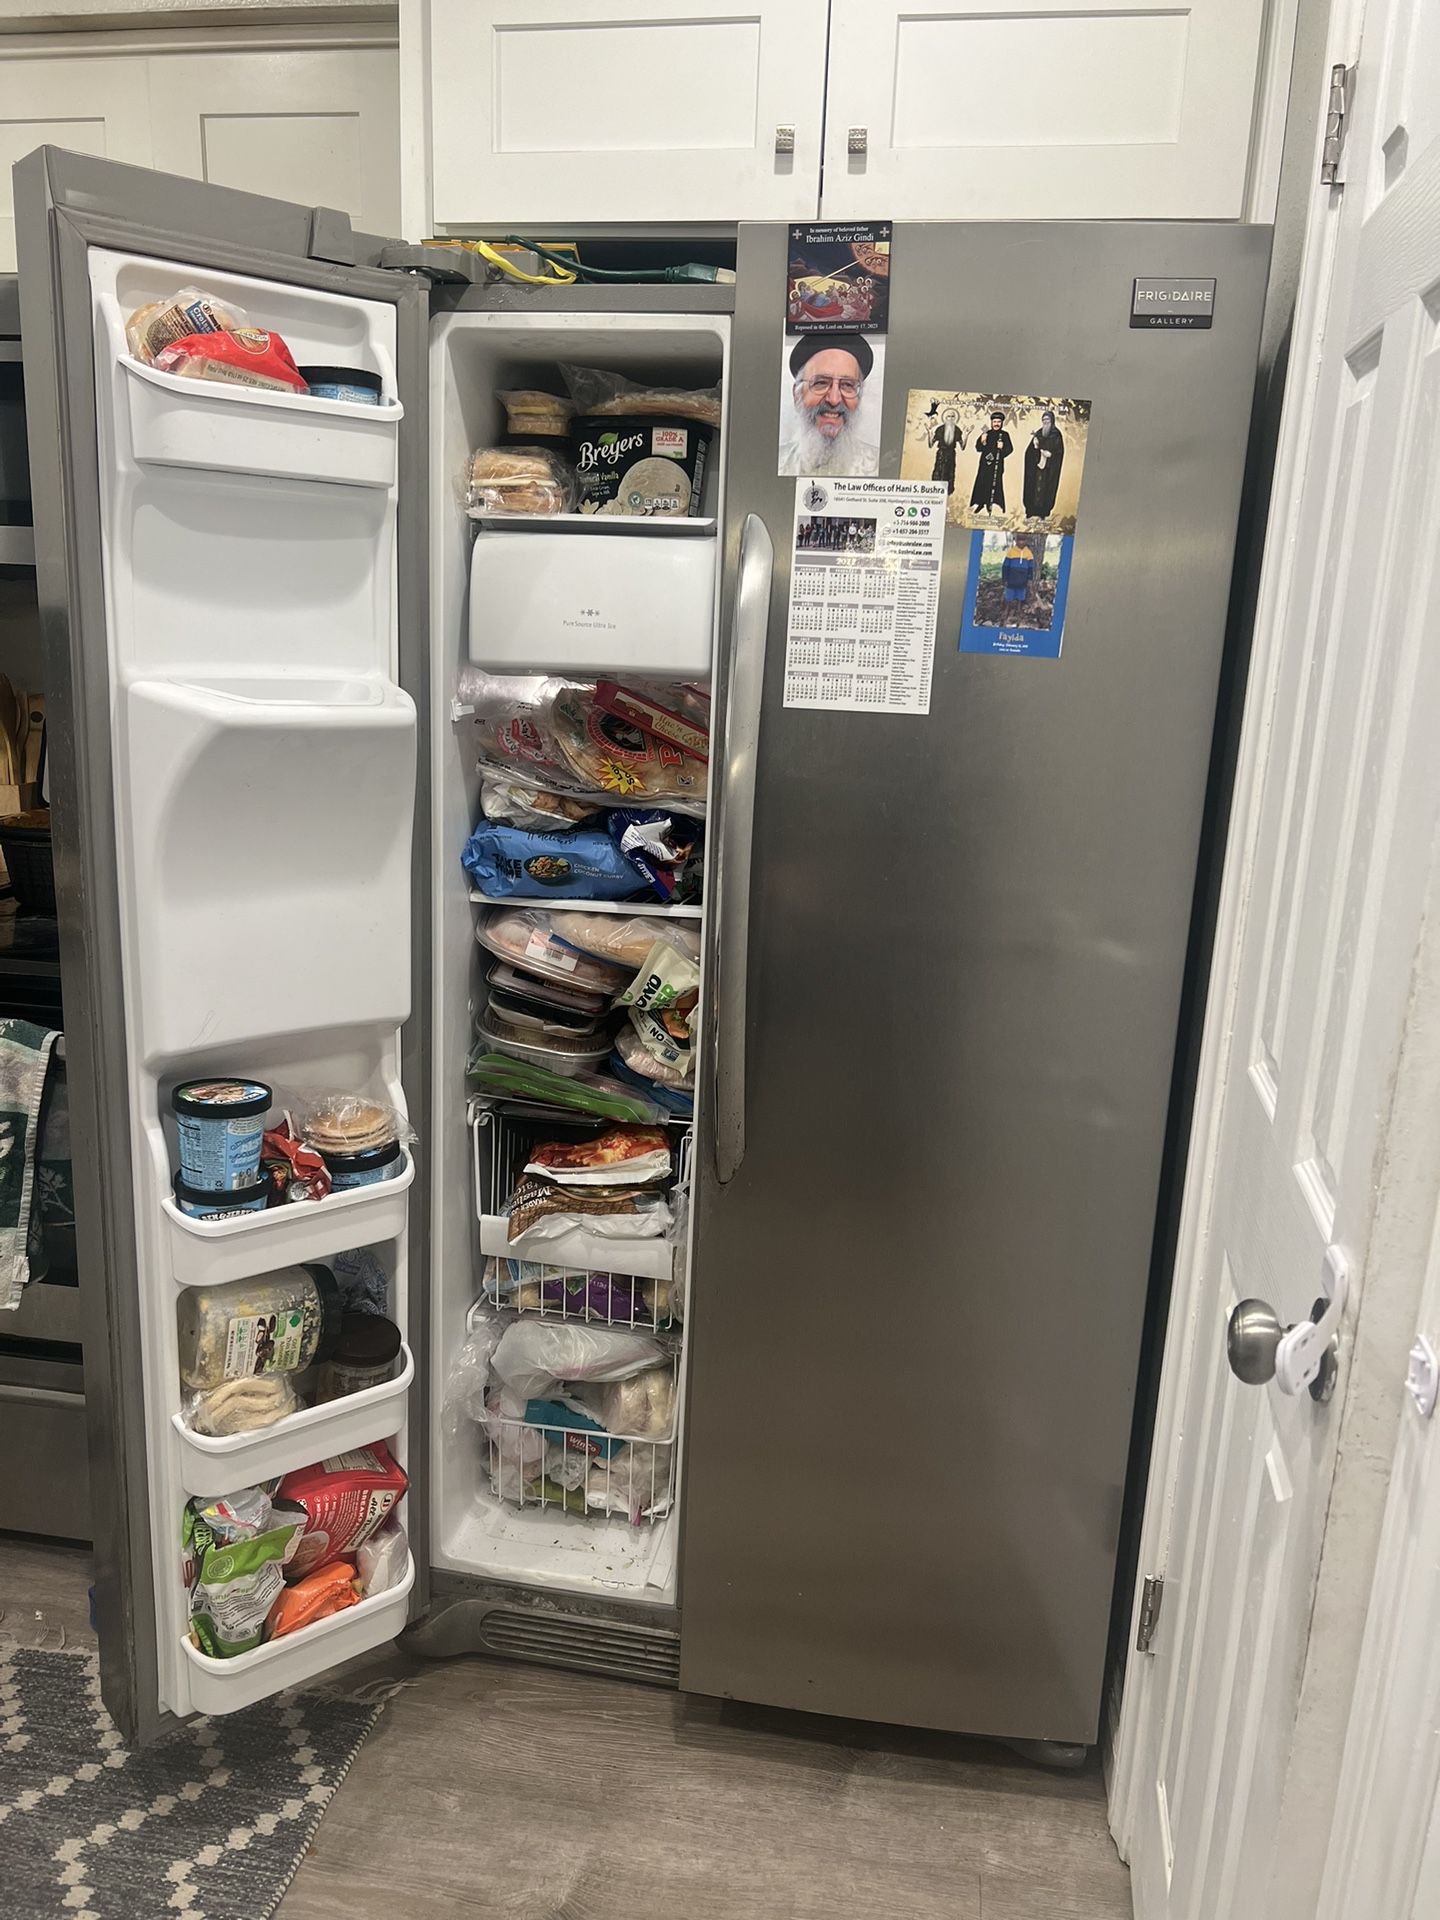 Frigidaire Side By Side Stainless Steel Fridge. Great condition for just $255!